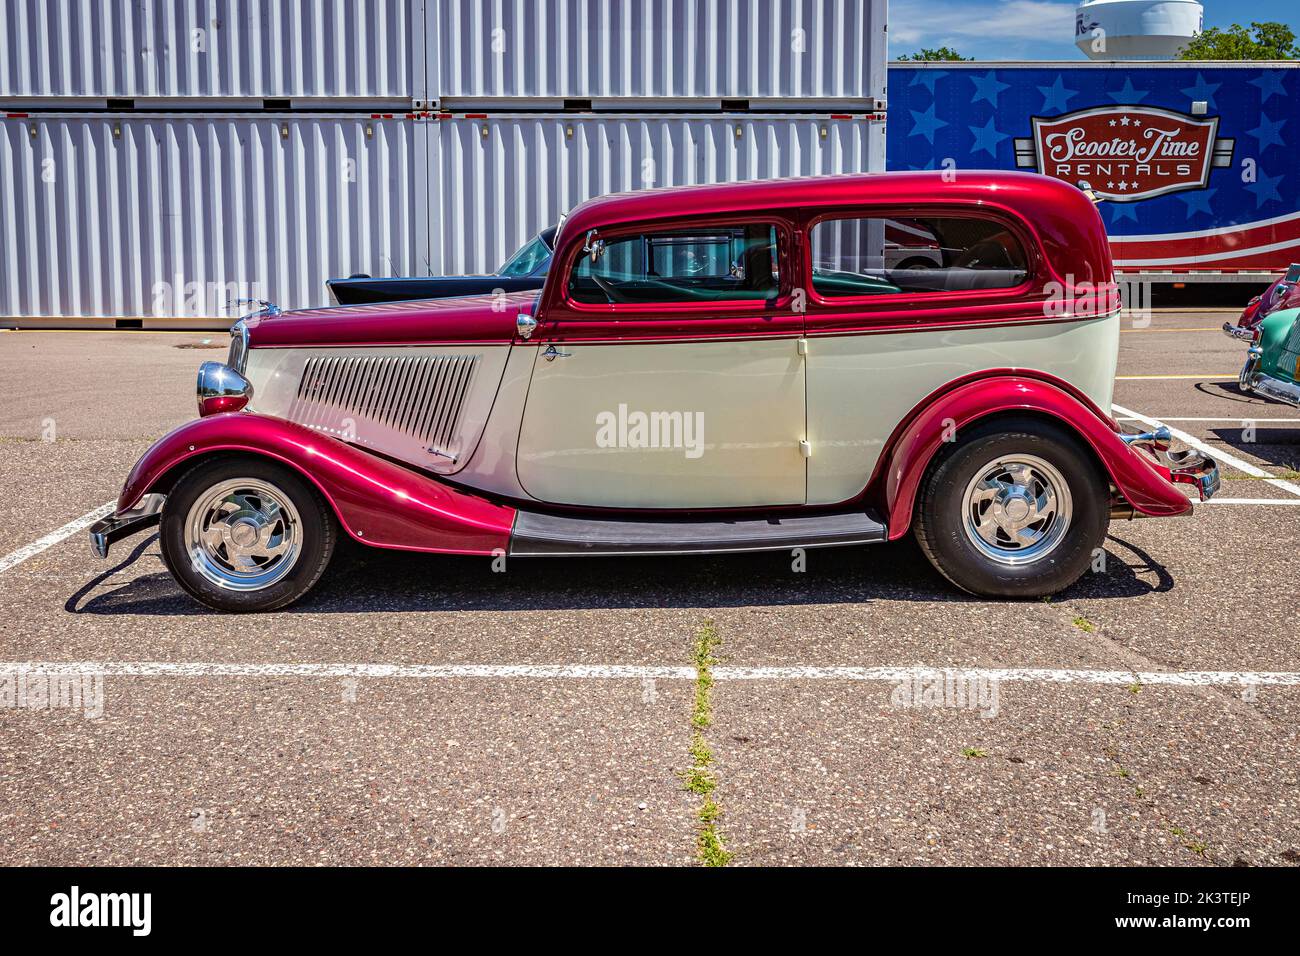 Falcon Heights, MN - June 18, 2022: High perspective side view of a 1934 Ford Model 40 Tudor Sedan at a local car show. Stock Photo